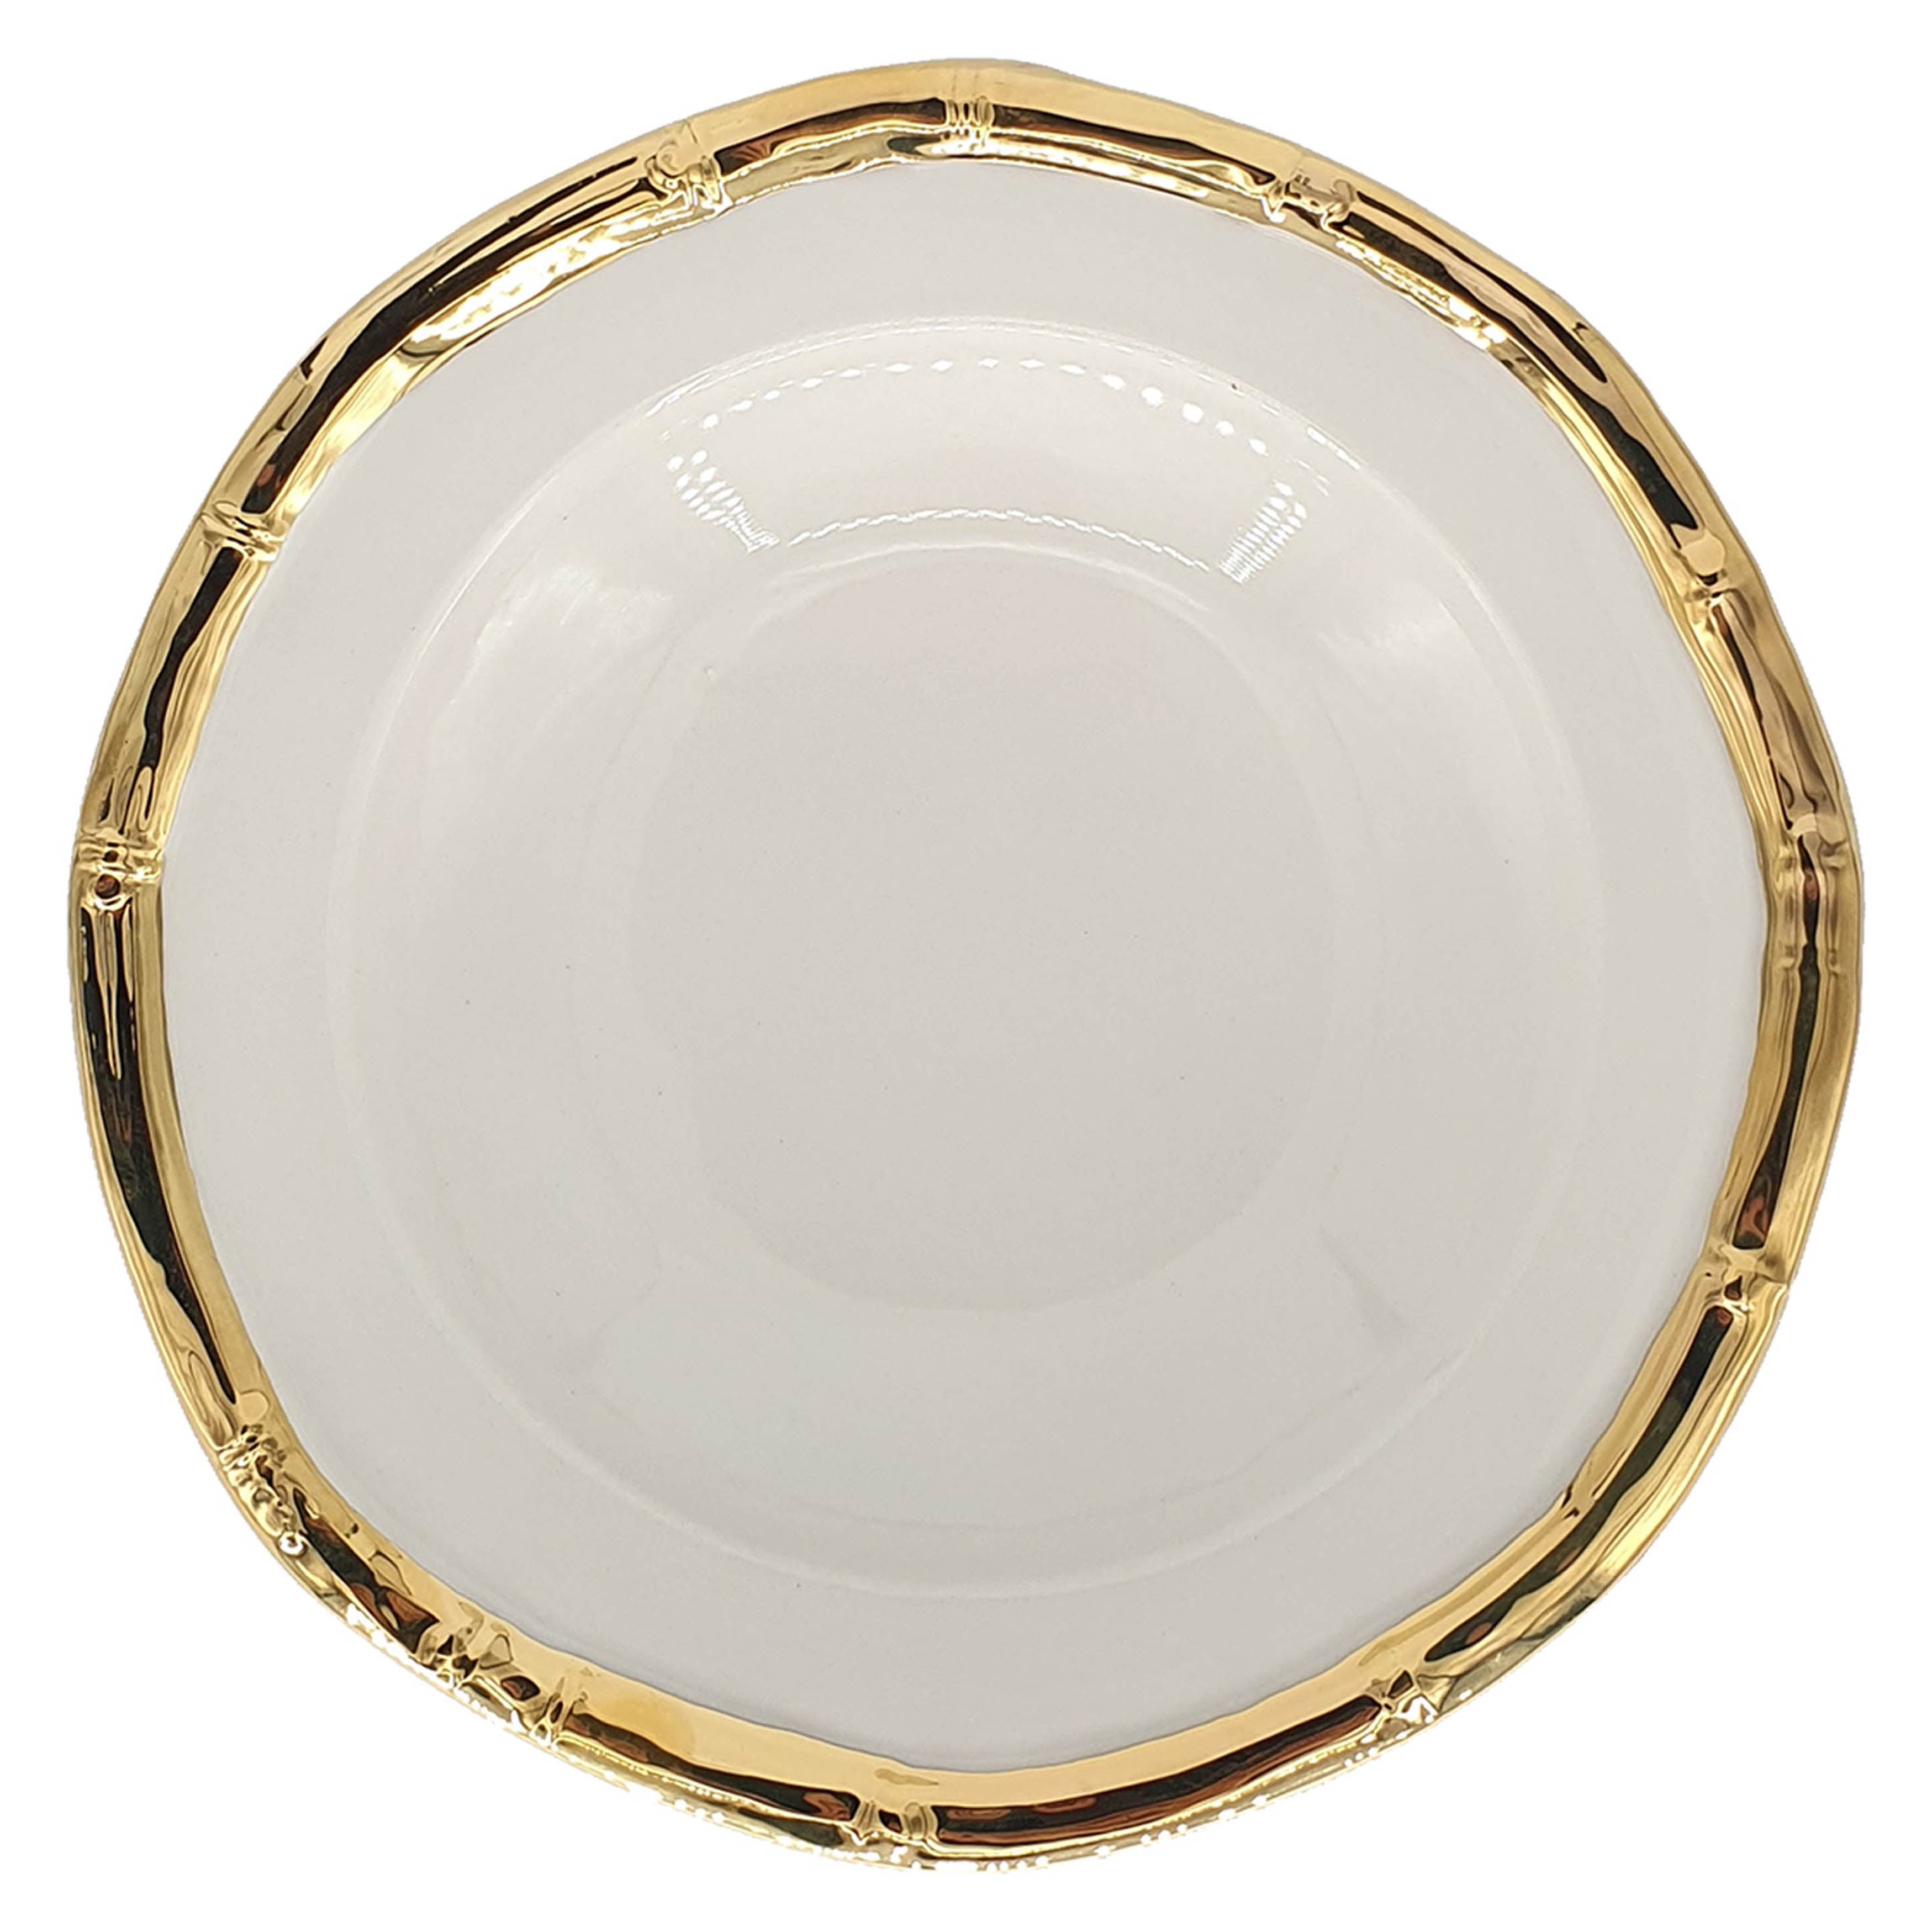 Bamboo Hand-Painted Ceramic Plate 27cm - Gold